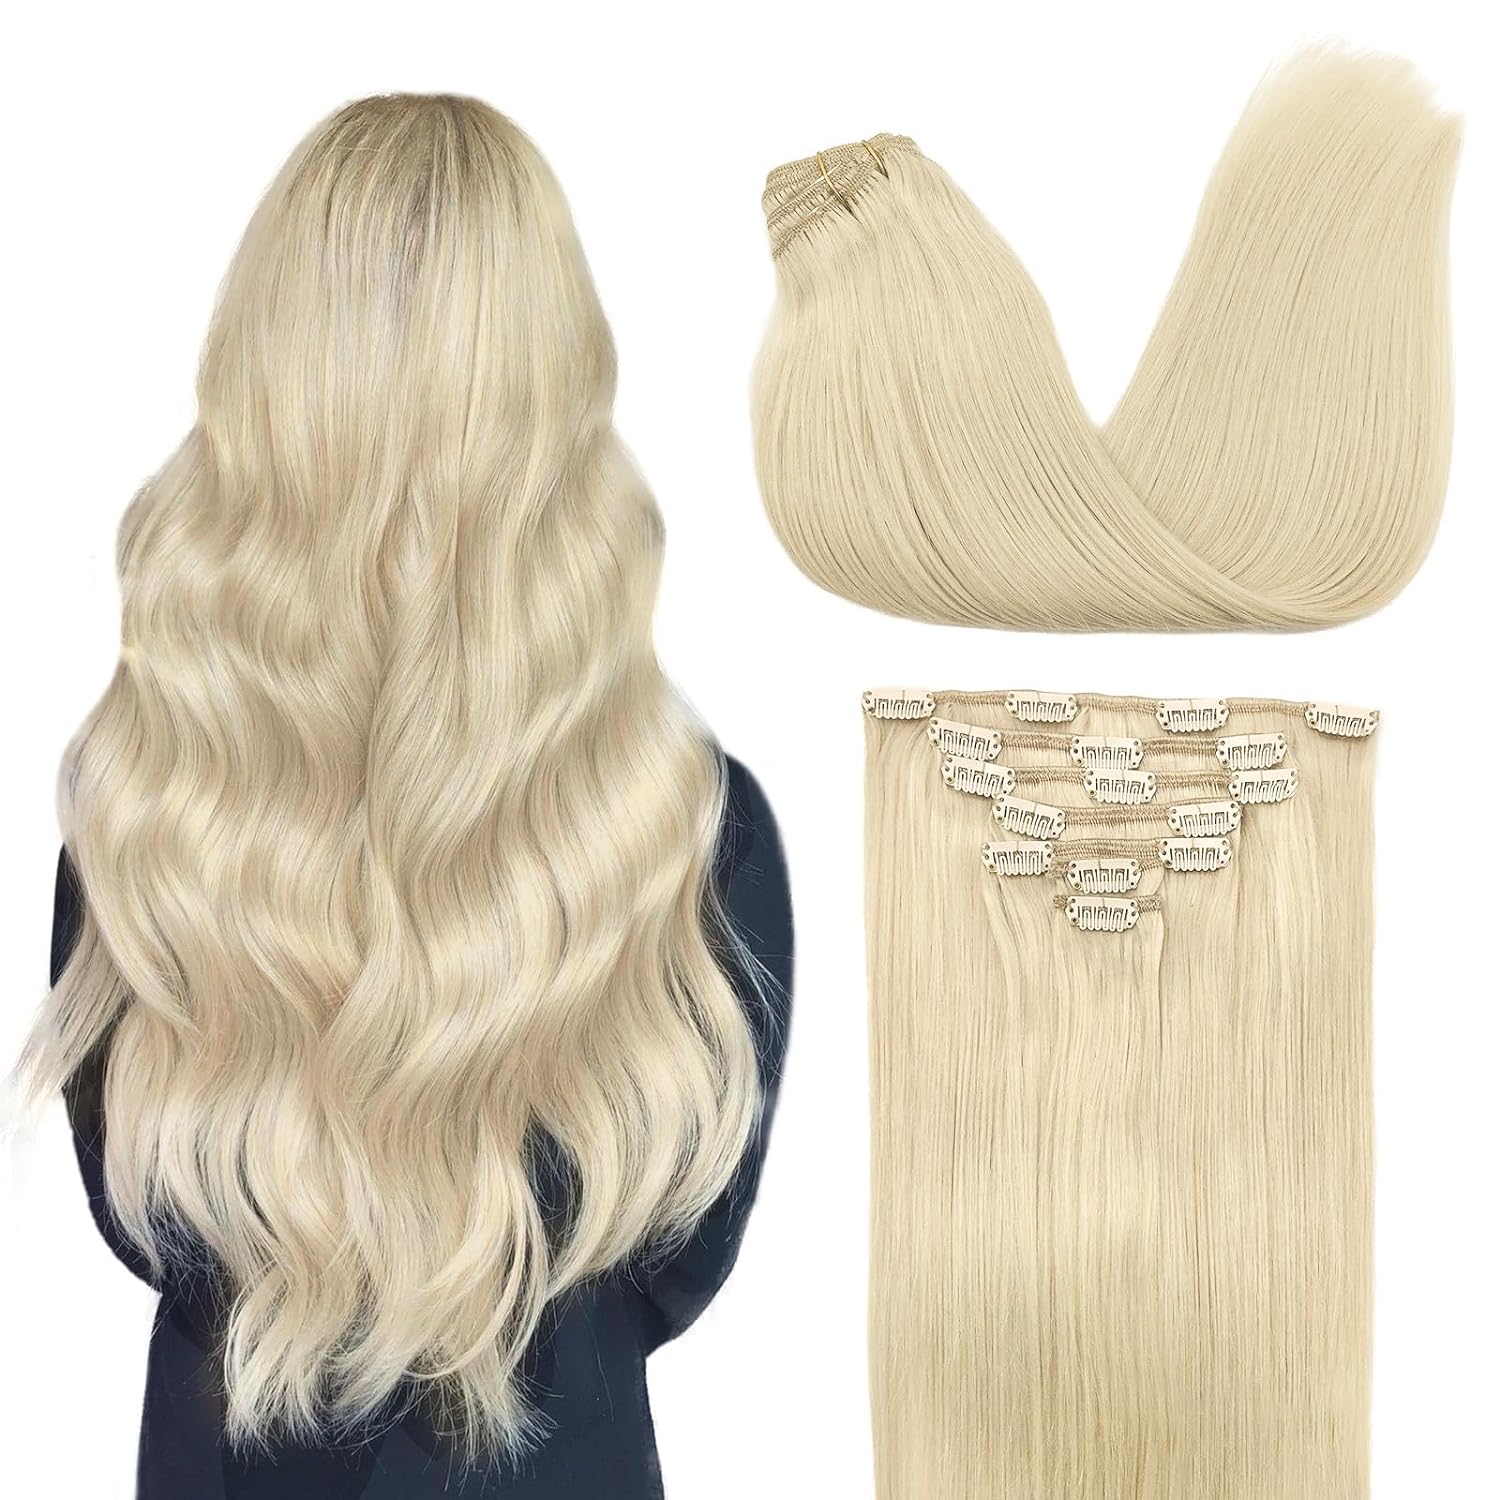 Luxurious Human Hair Extensions Review: Soft and Versatile